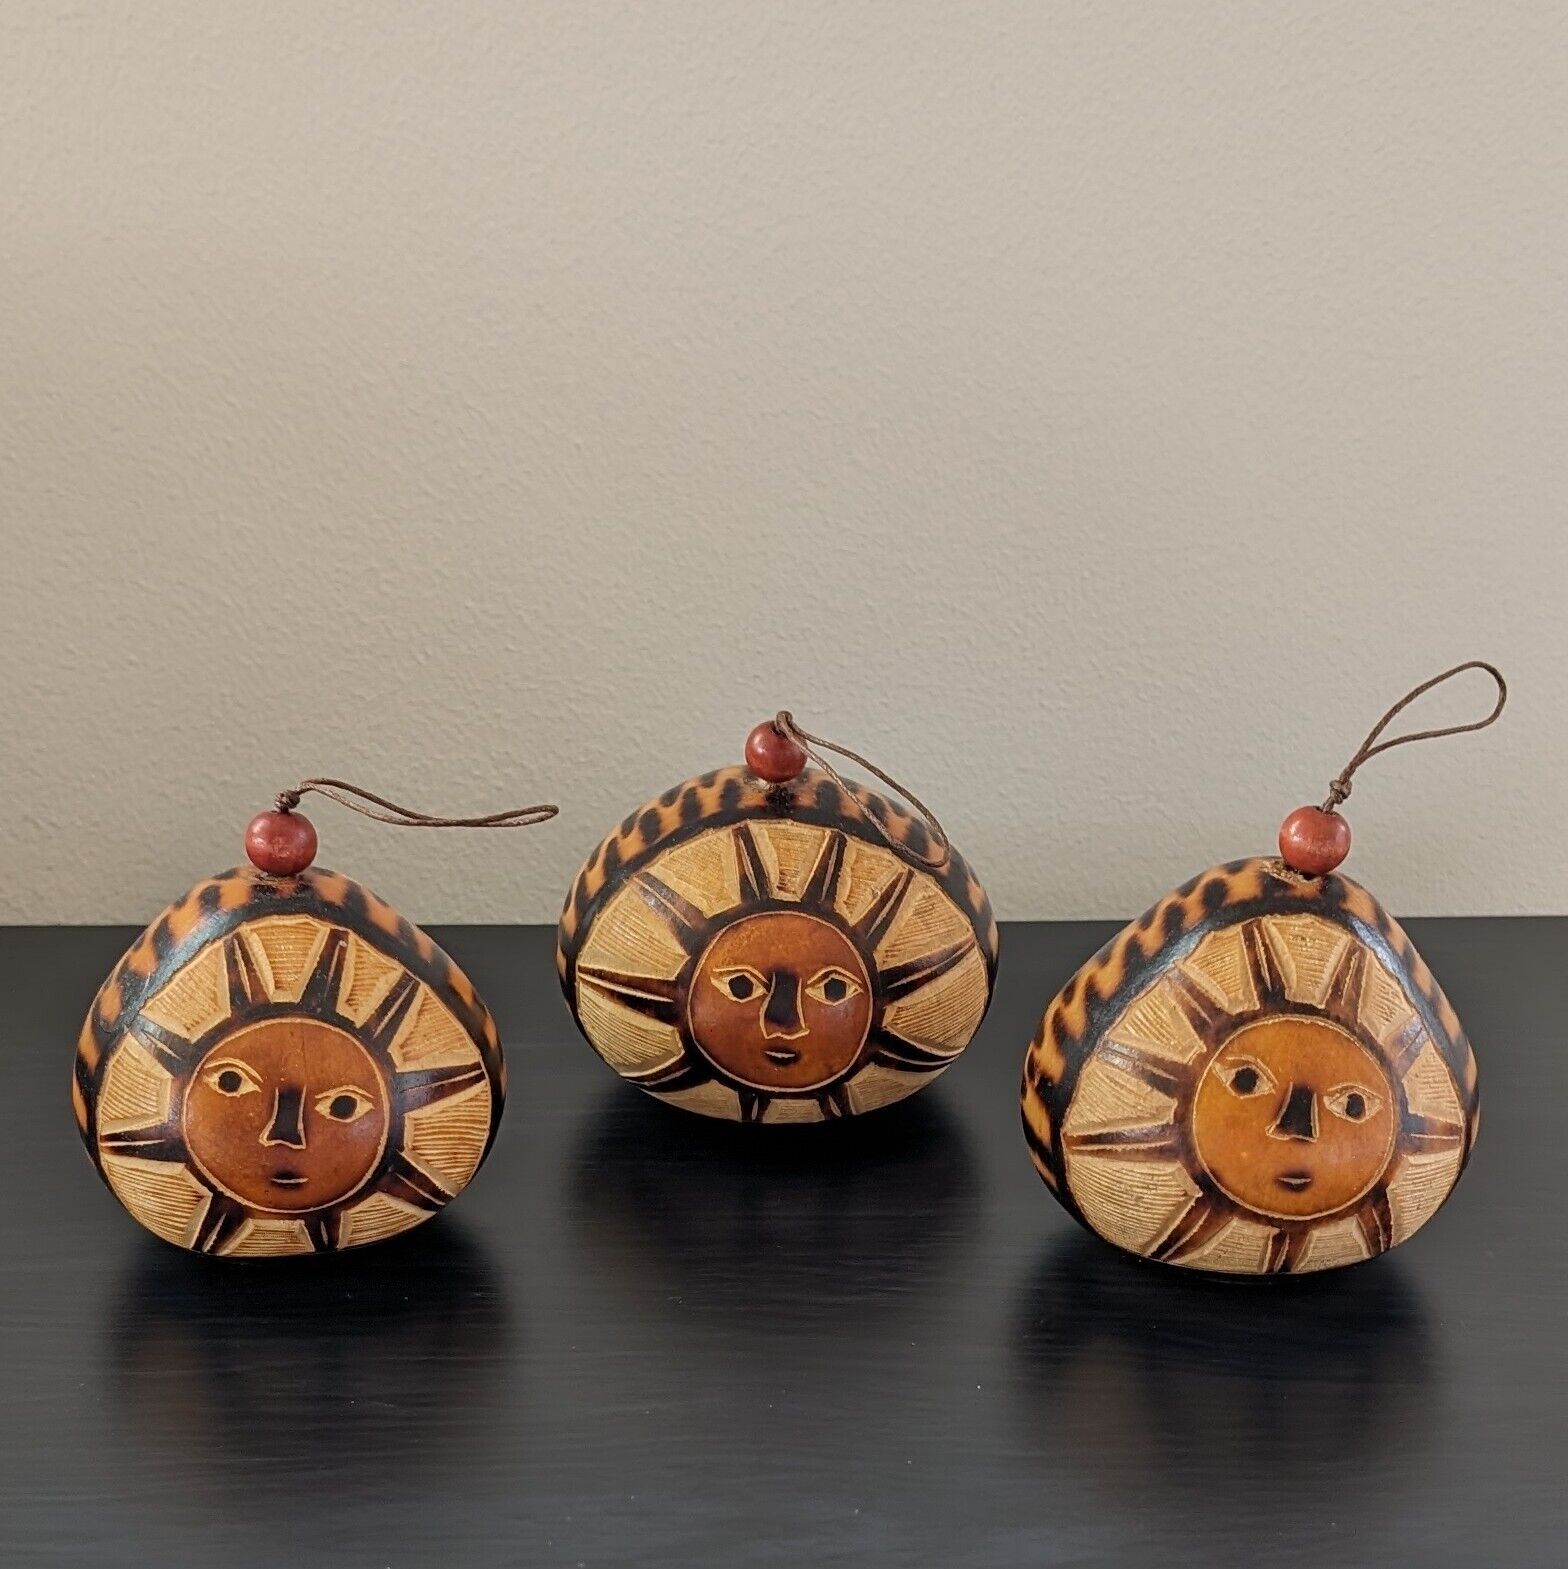 Set of 3 Mates Burilados Sun & Moon Gourd Ornaments Hand Carved & Painted Peru